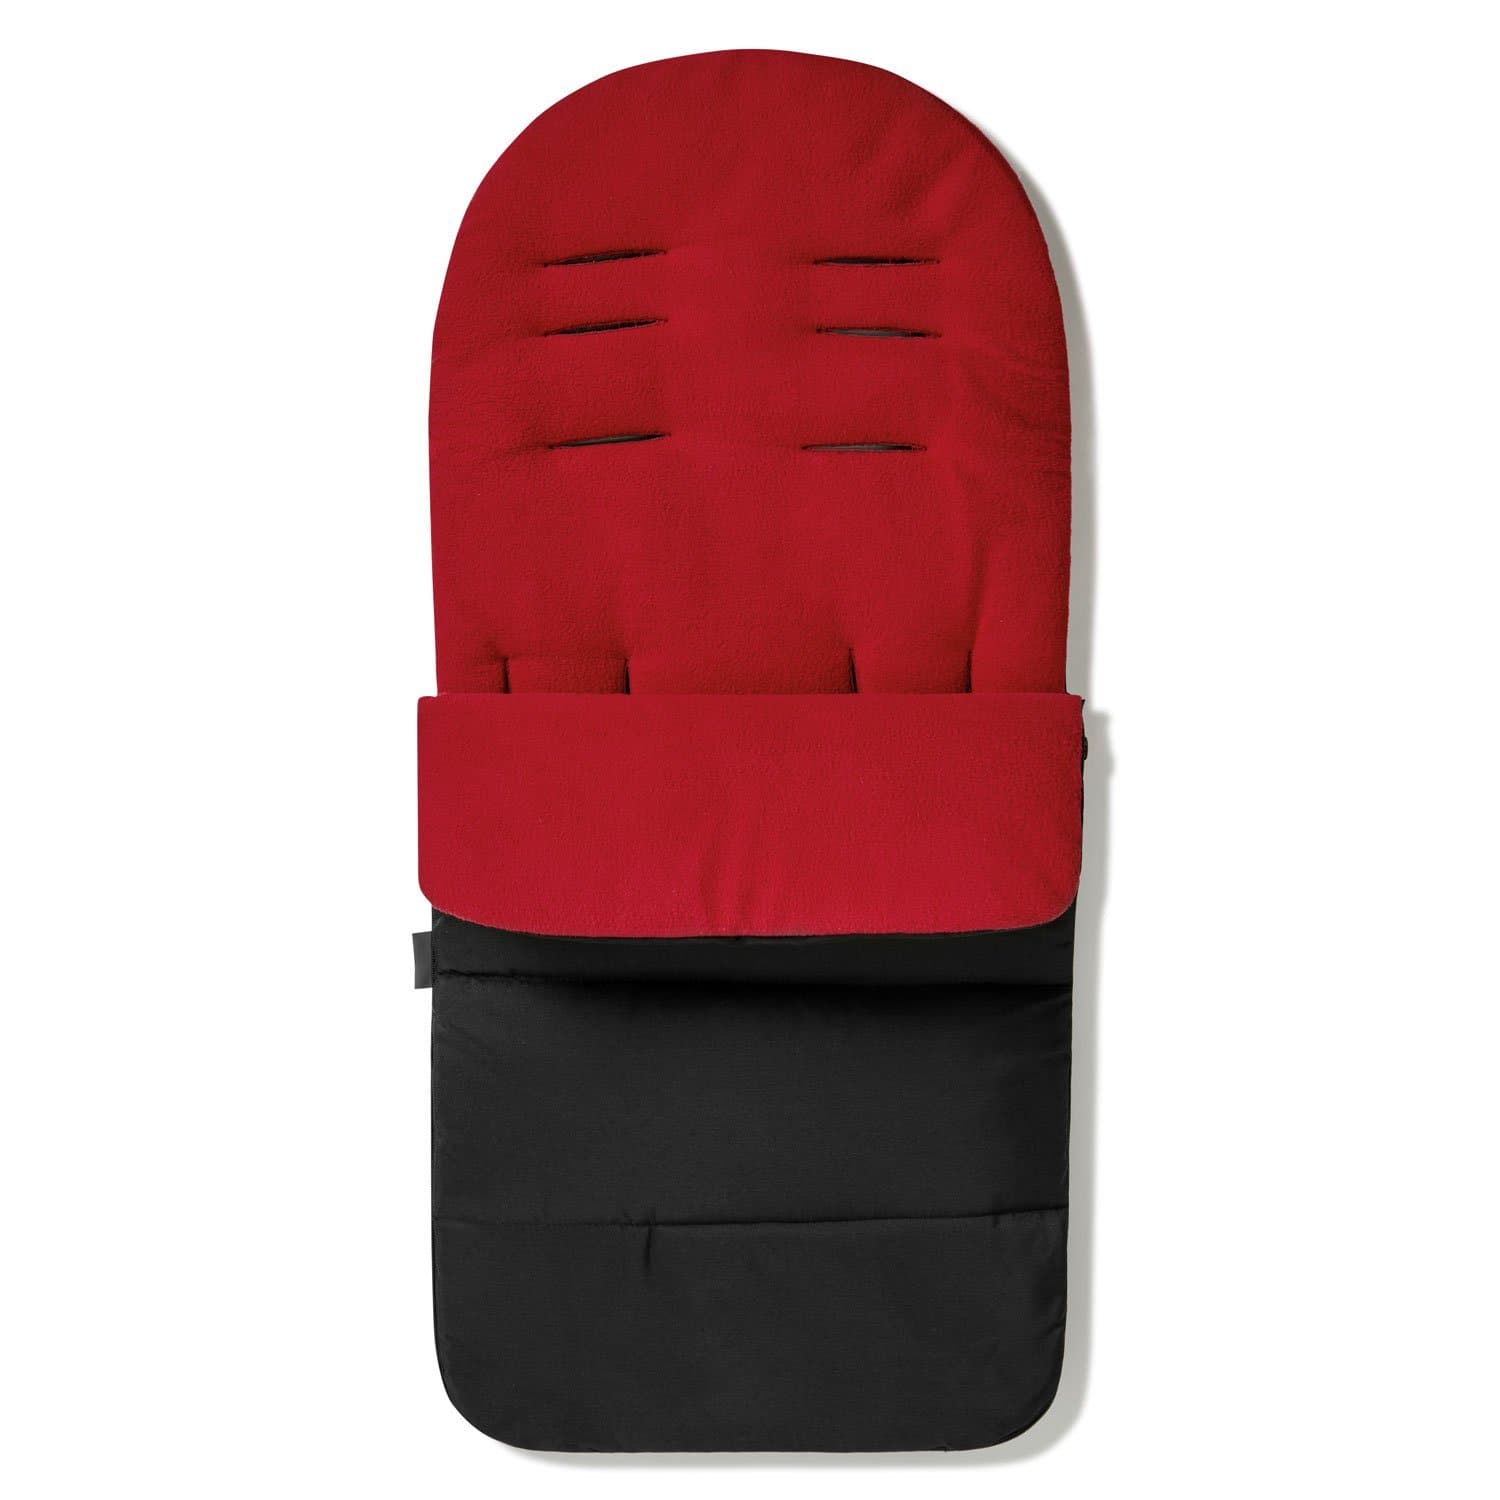 Premium Footmuff / Cosy Toes Compatible with Greentom - Fire Red / Fits All Models | For Your Little One